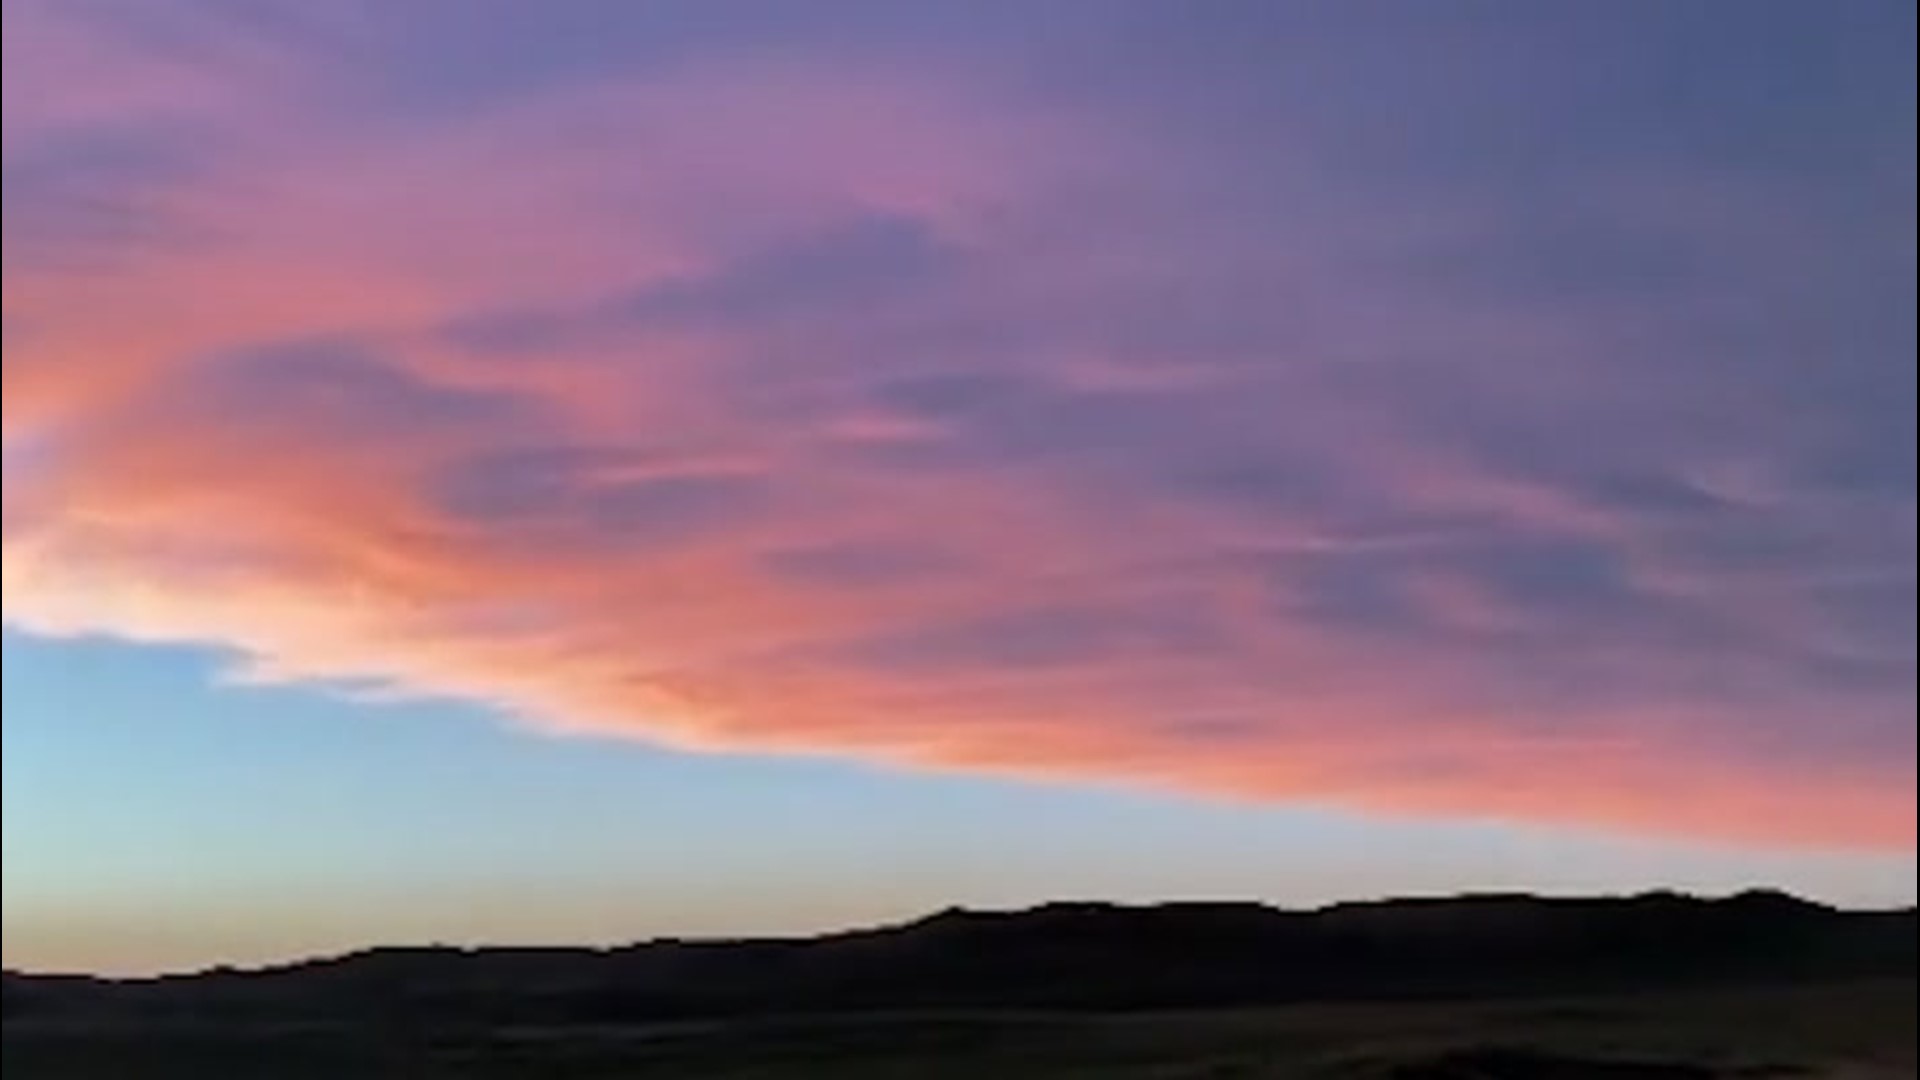 While filming in Merriman, Nebraska, one weather enthusiast was able to catch both a lightning storm and a fantastic sunset, on July 10.